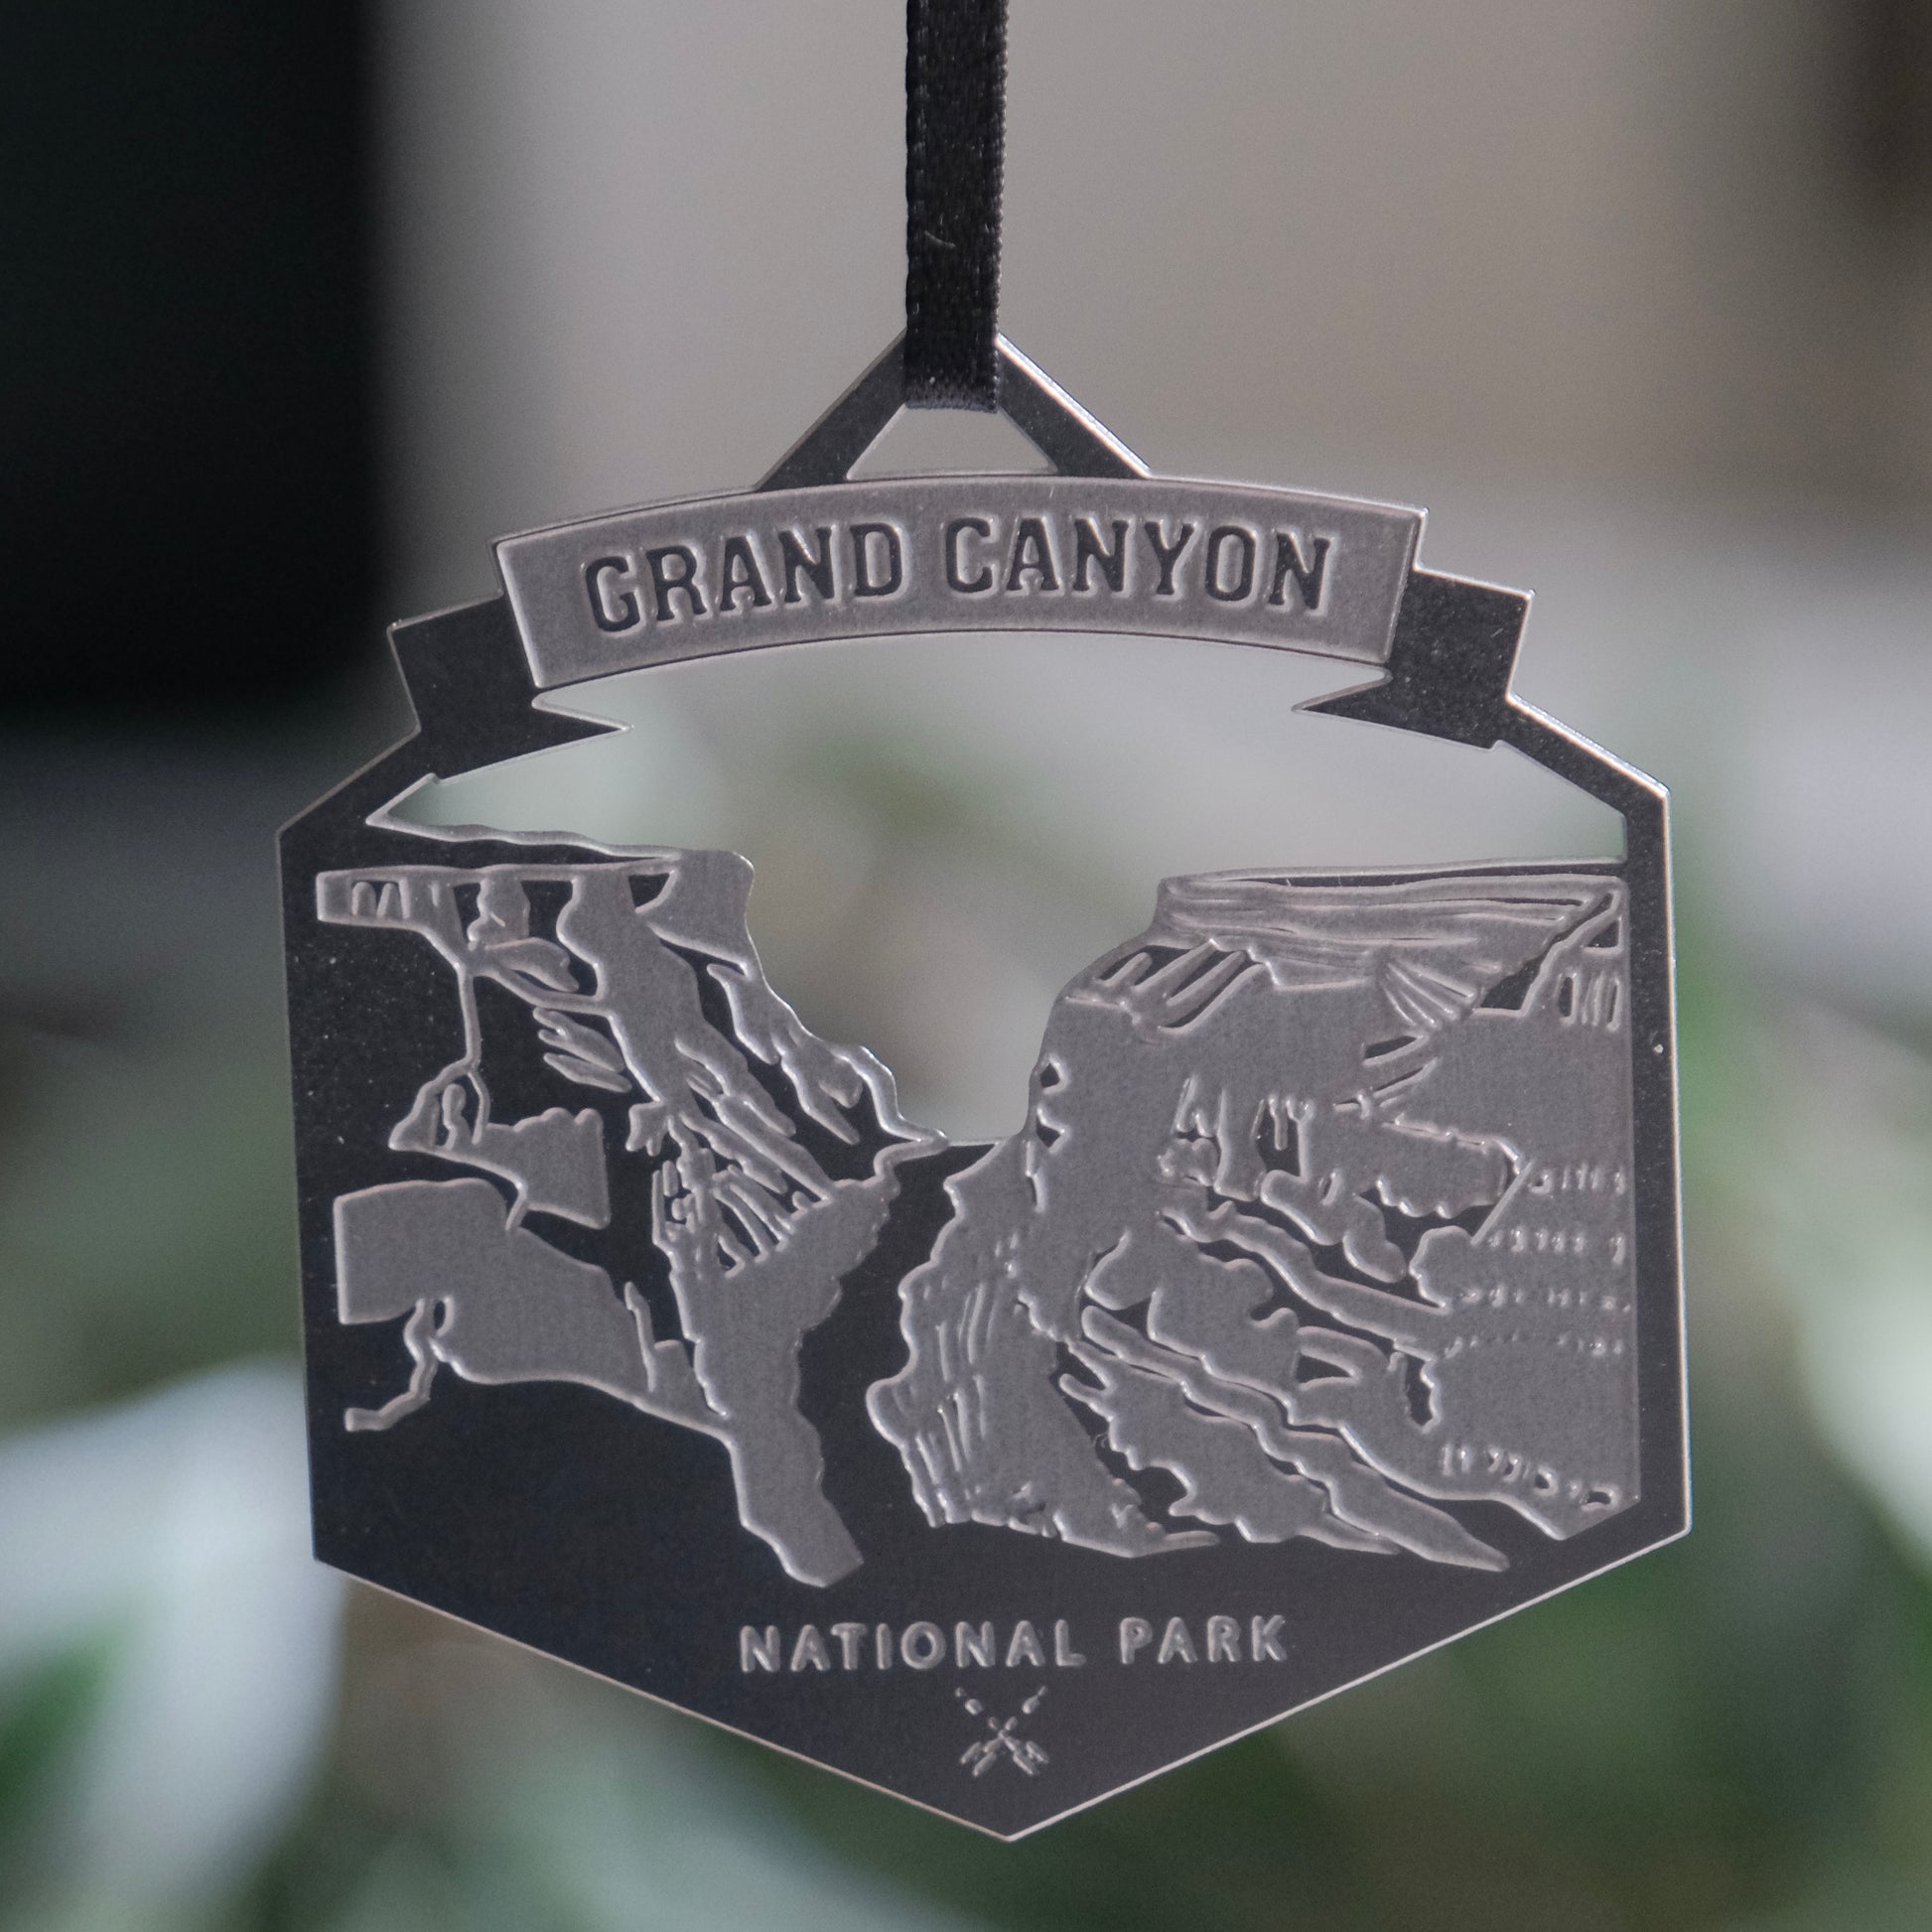 Grand Canyon National Park Ornament. Made in the USA. Stainless Steel. 2 1/4"w x 2"h